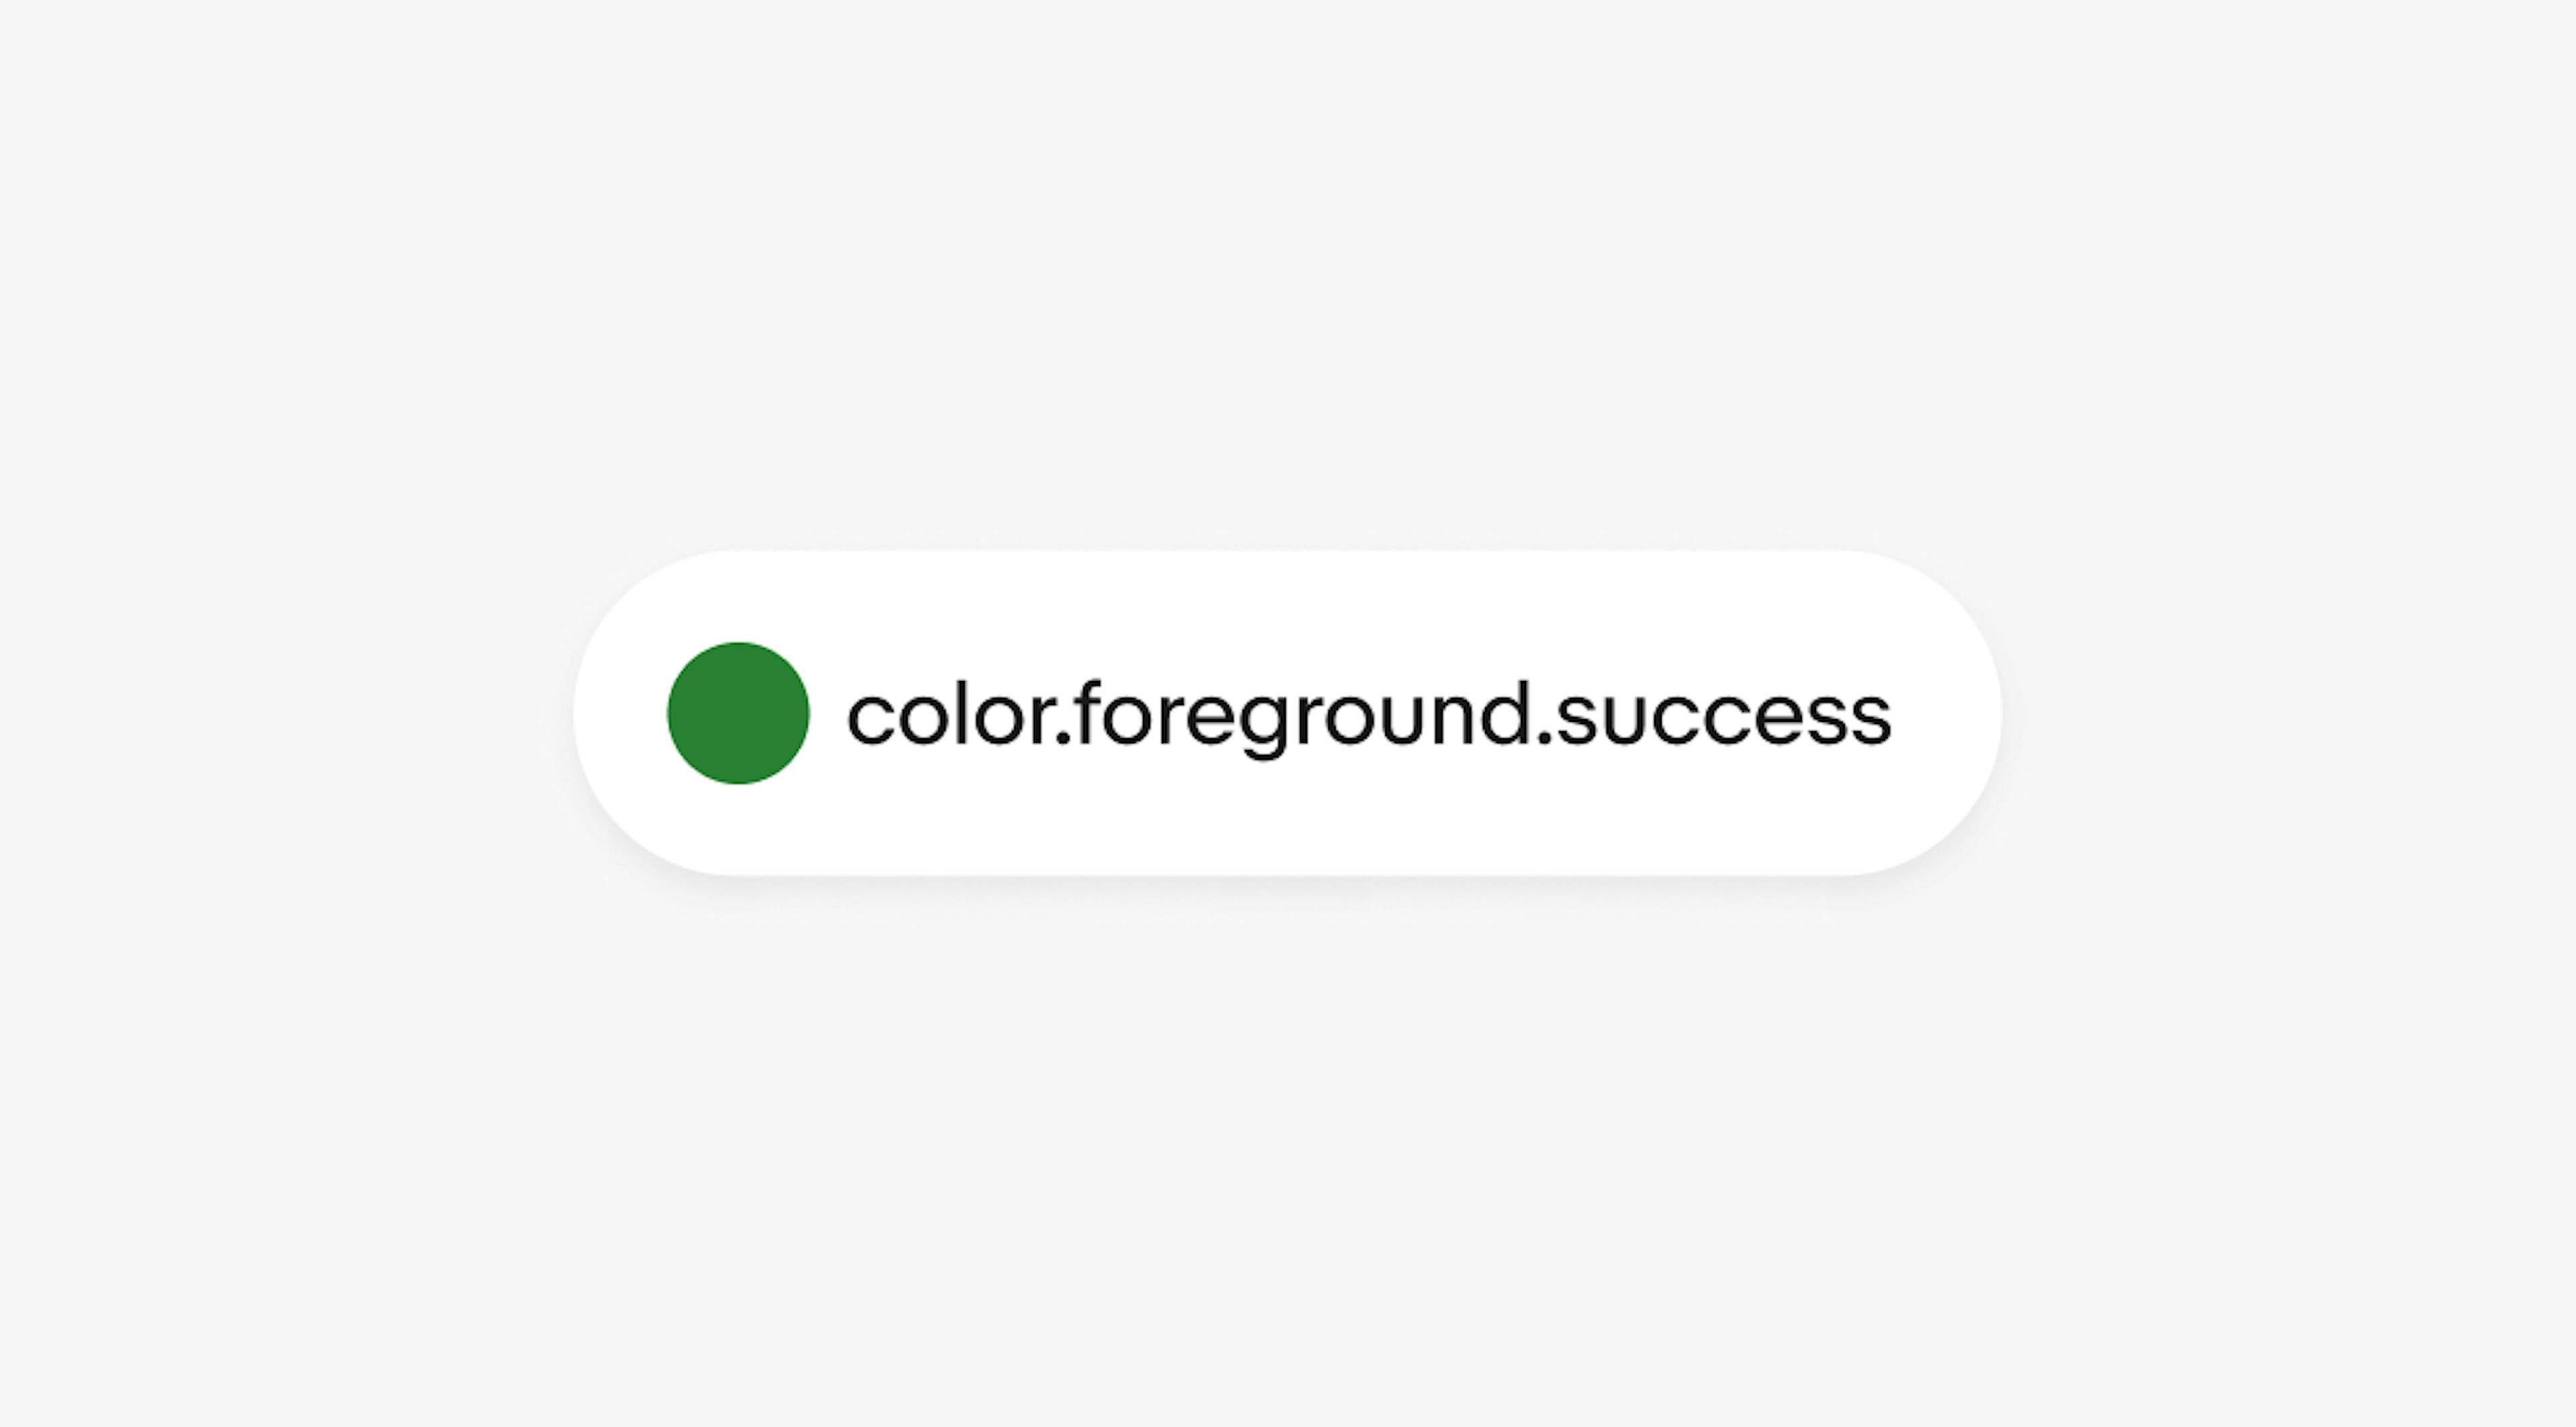 A pill graphic containing a circle in green with the text “color.foreground.success”.